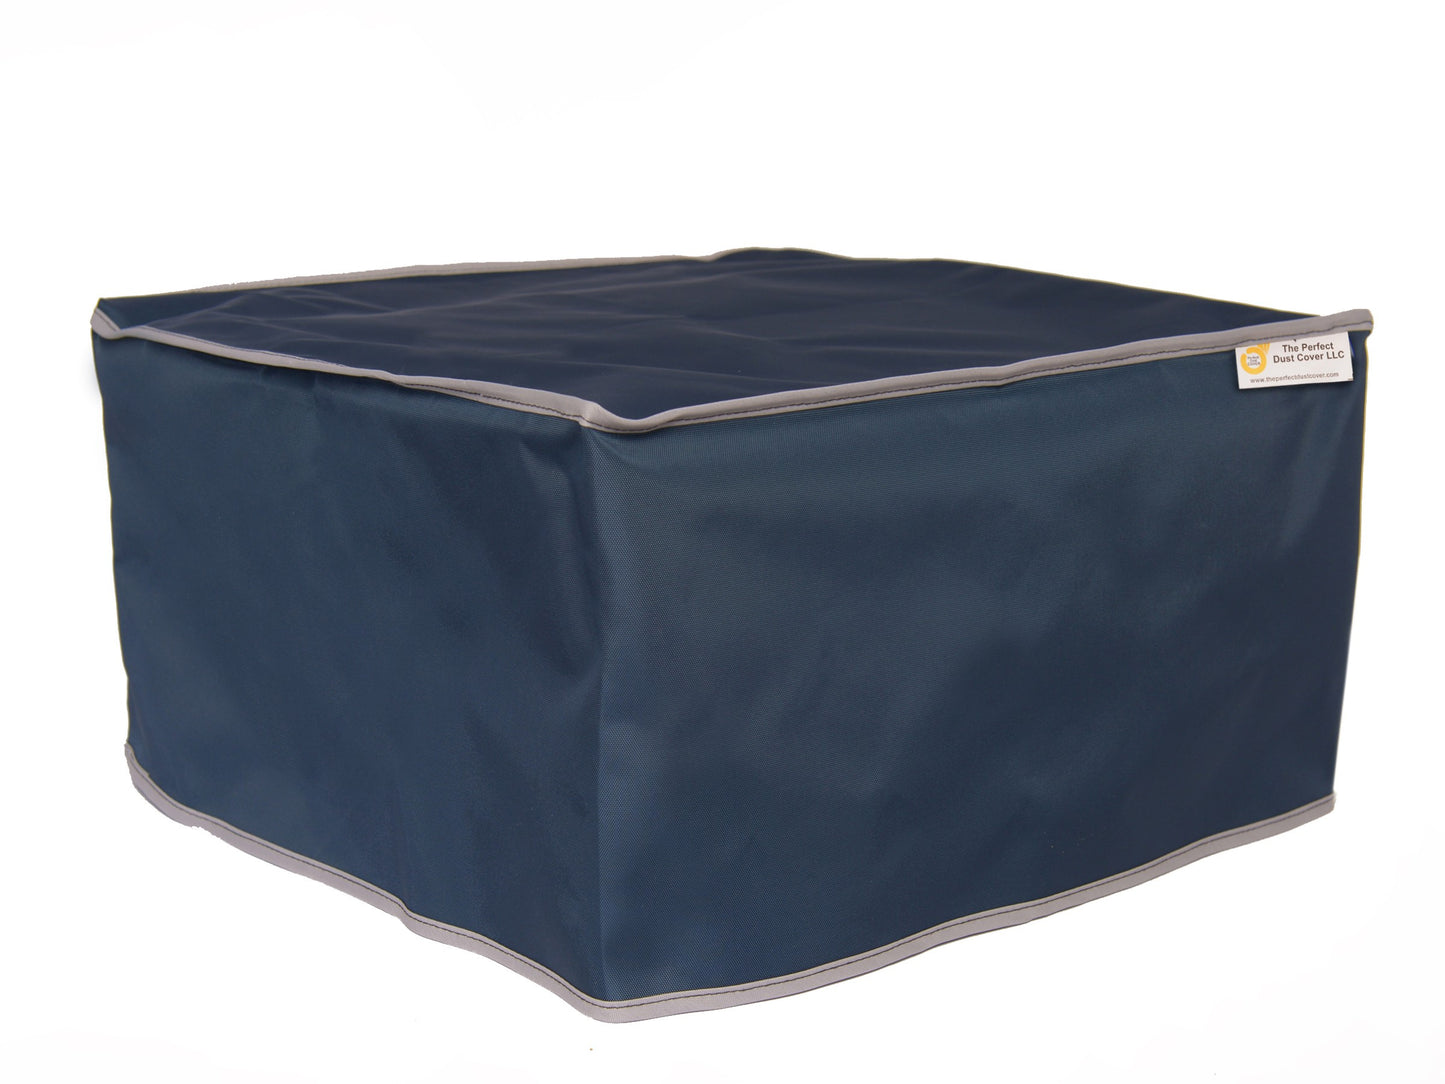 The Perfect Dust Cover, Navy Blue Nylon Cover Compatible with Ninja Woodfire Pro Outdoor Grill & Smoker Model OG751B2, Anti Static, Double Stitched and Waterproof Dust Cover Dimensions 18.6''W x 23.7''D x 13.3''H by Perfect Dust Cover LLC